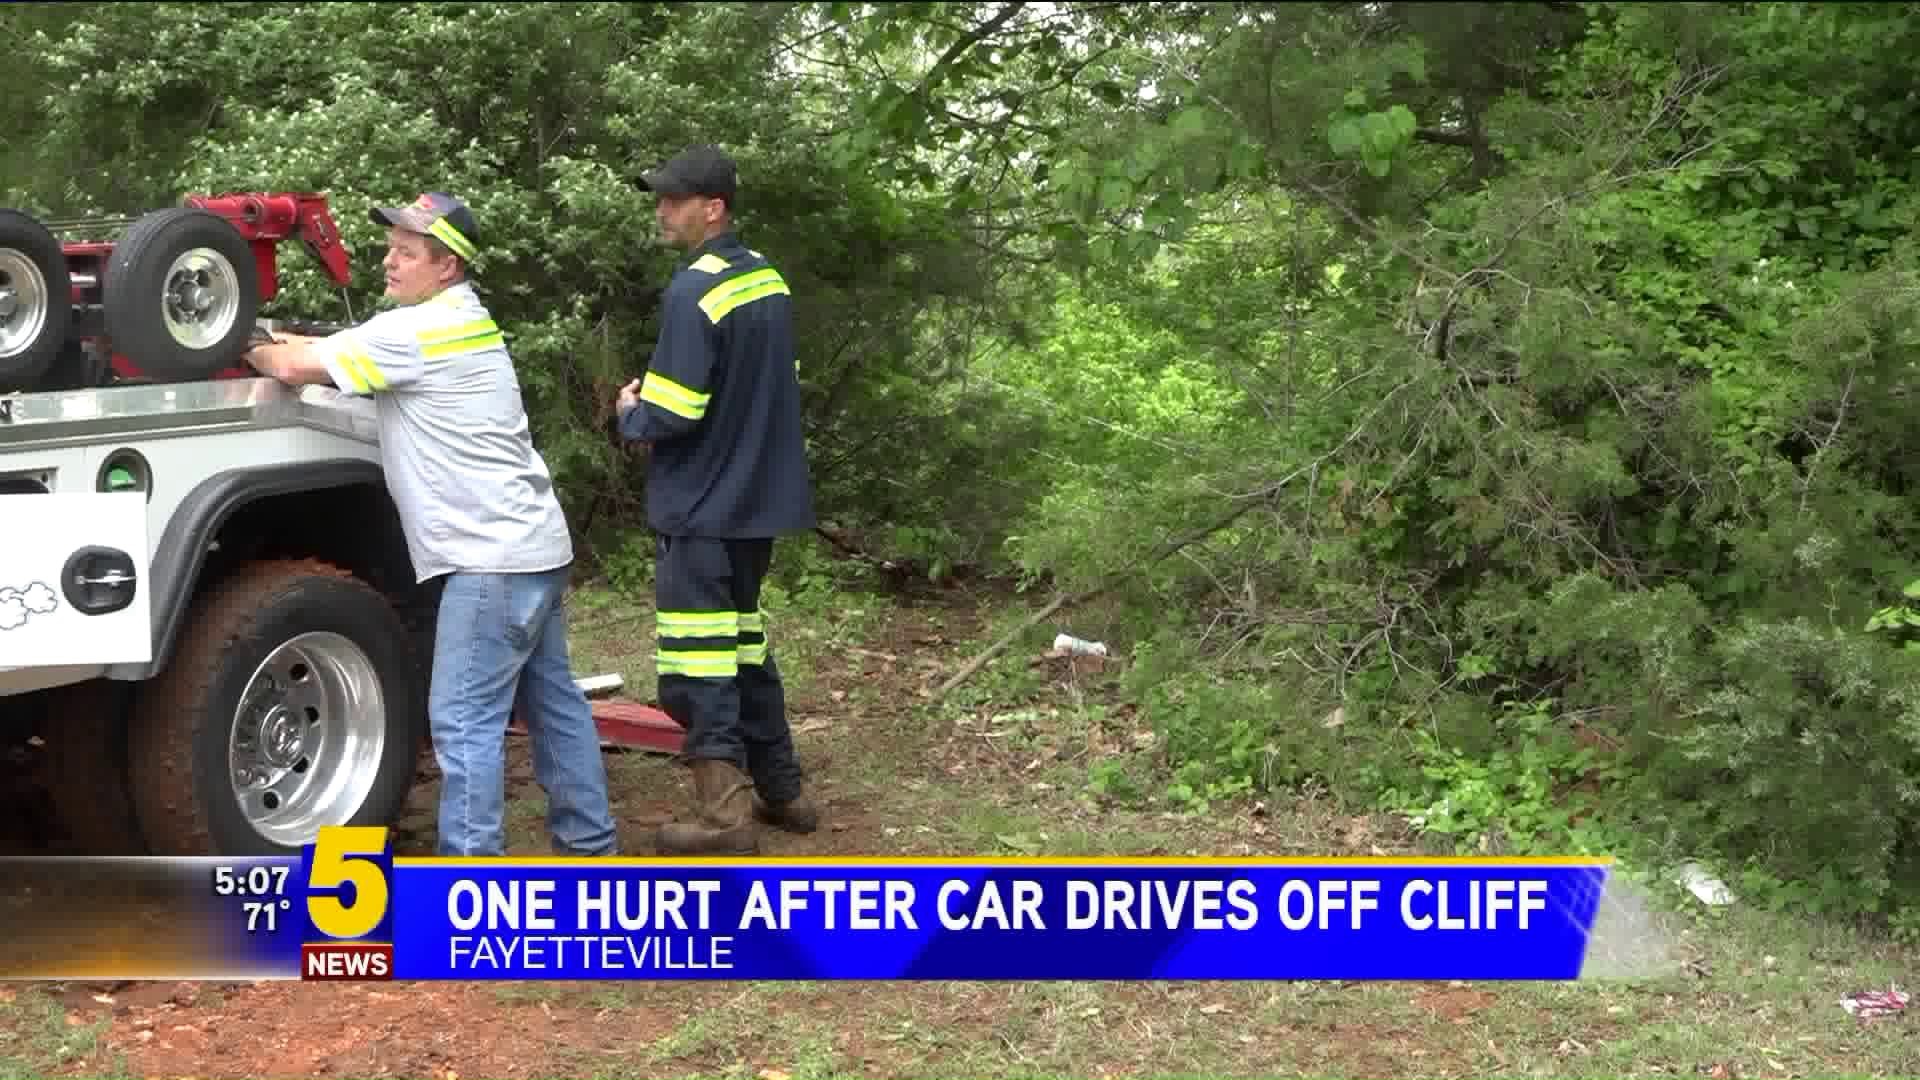 One Hurt After Car Drives Off Cliff in Fayetteville